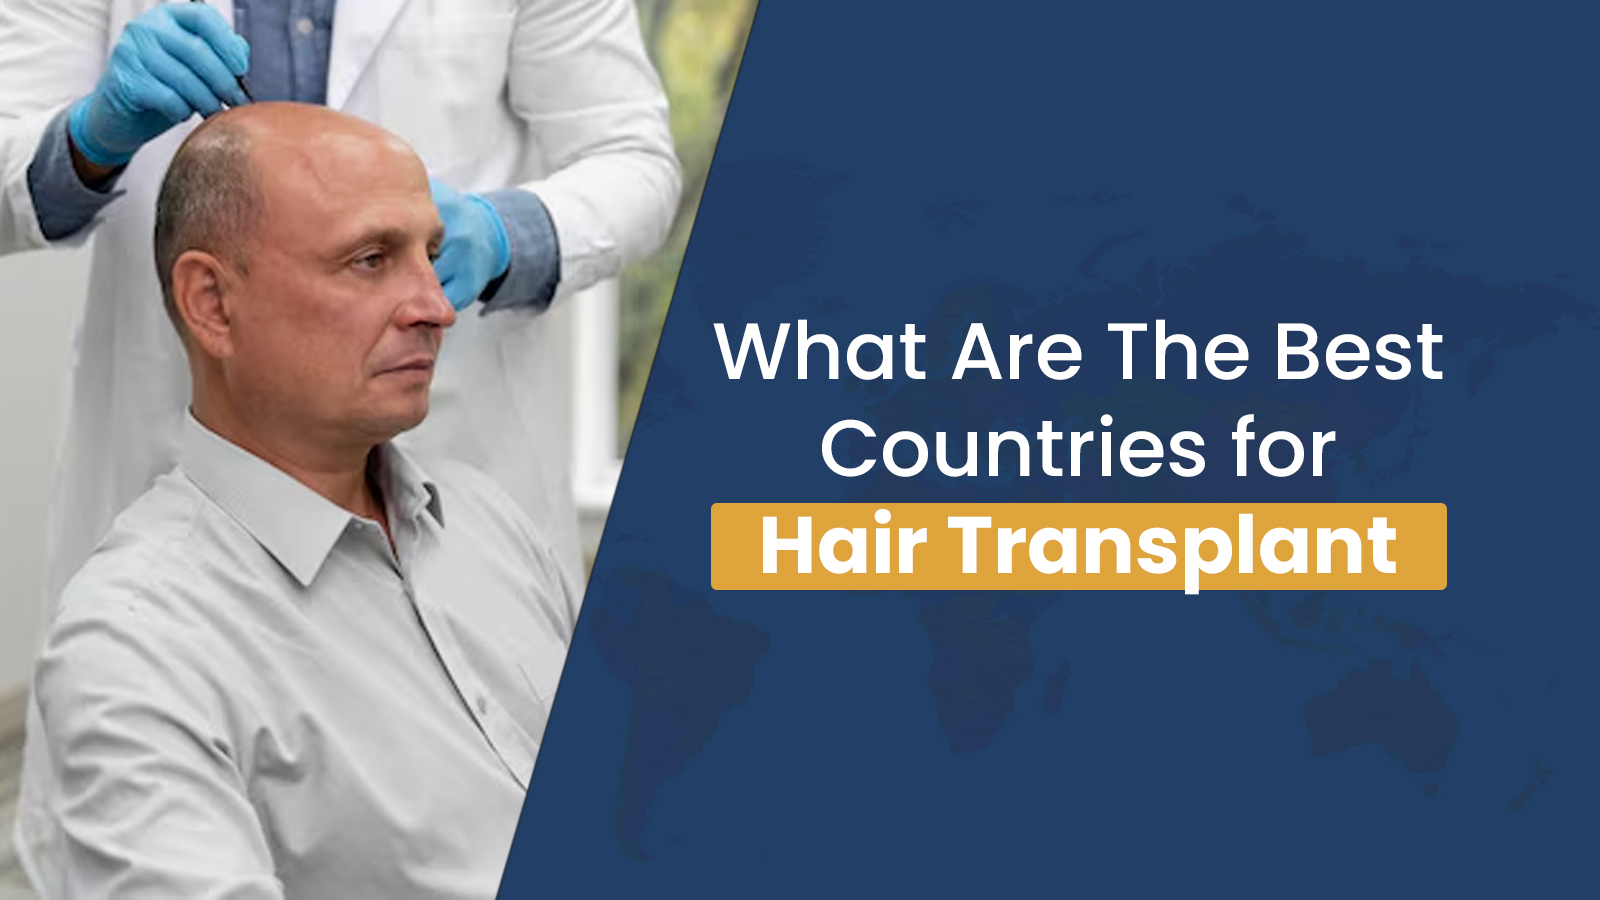 What are the Best Countries for Hair Transplant Surgery